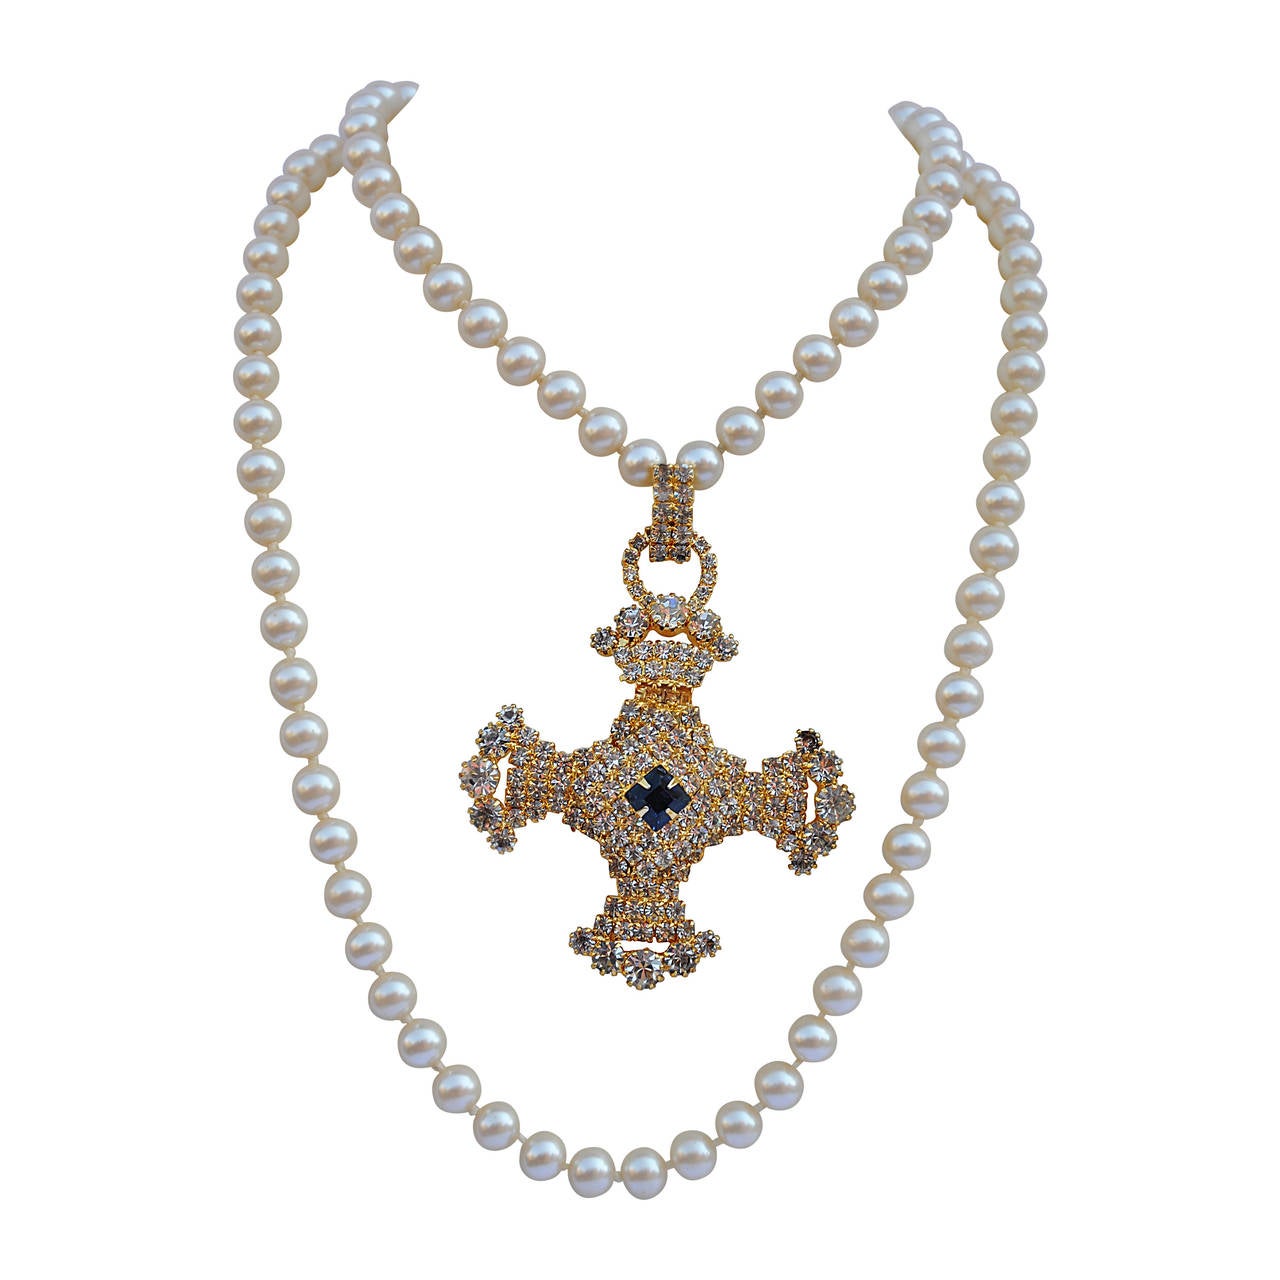 Magnificent Double-Strand Pearl Necklace with Huge Rhinestone Cross For Sale